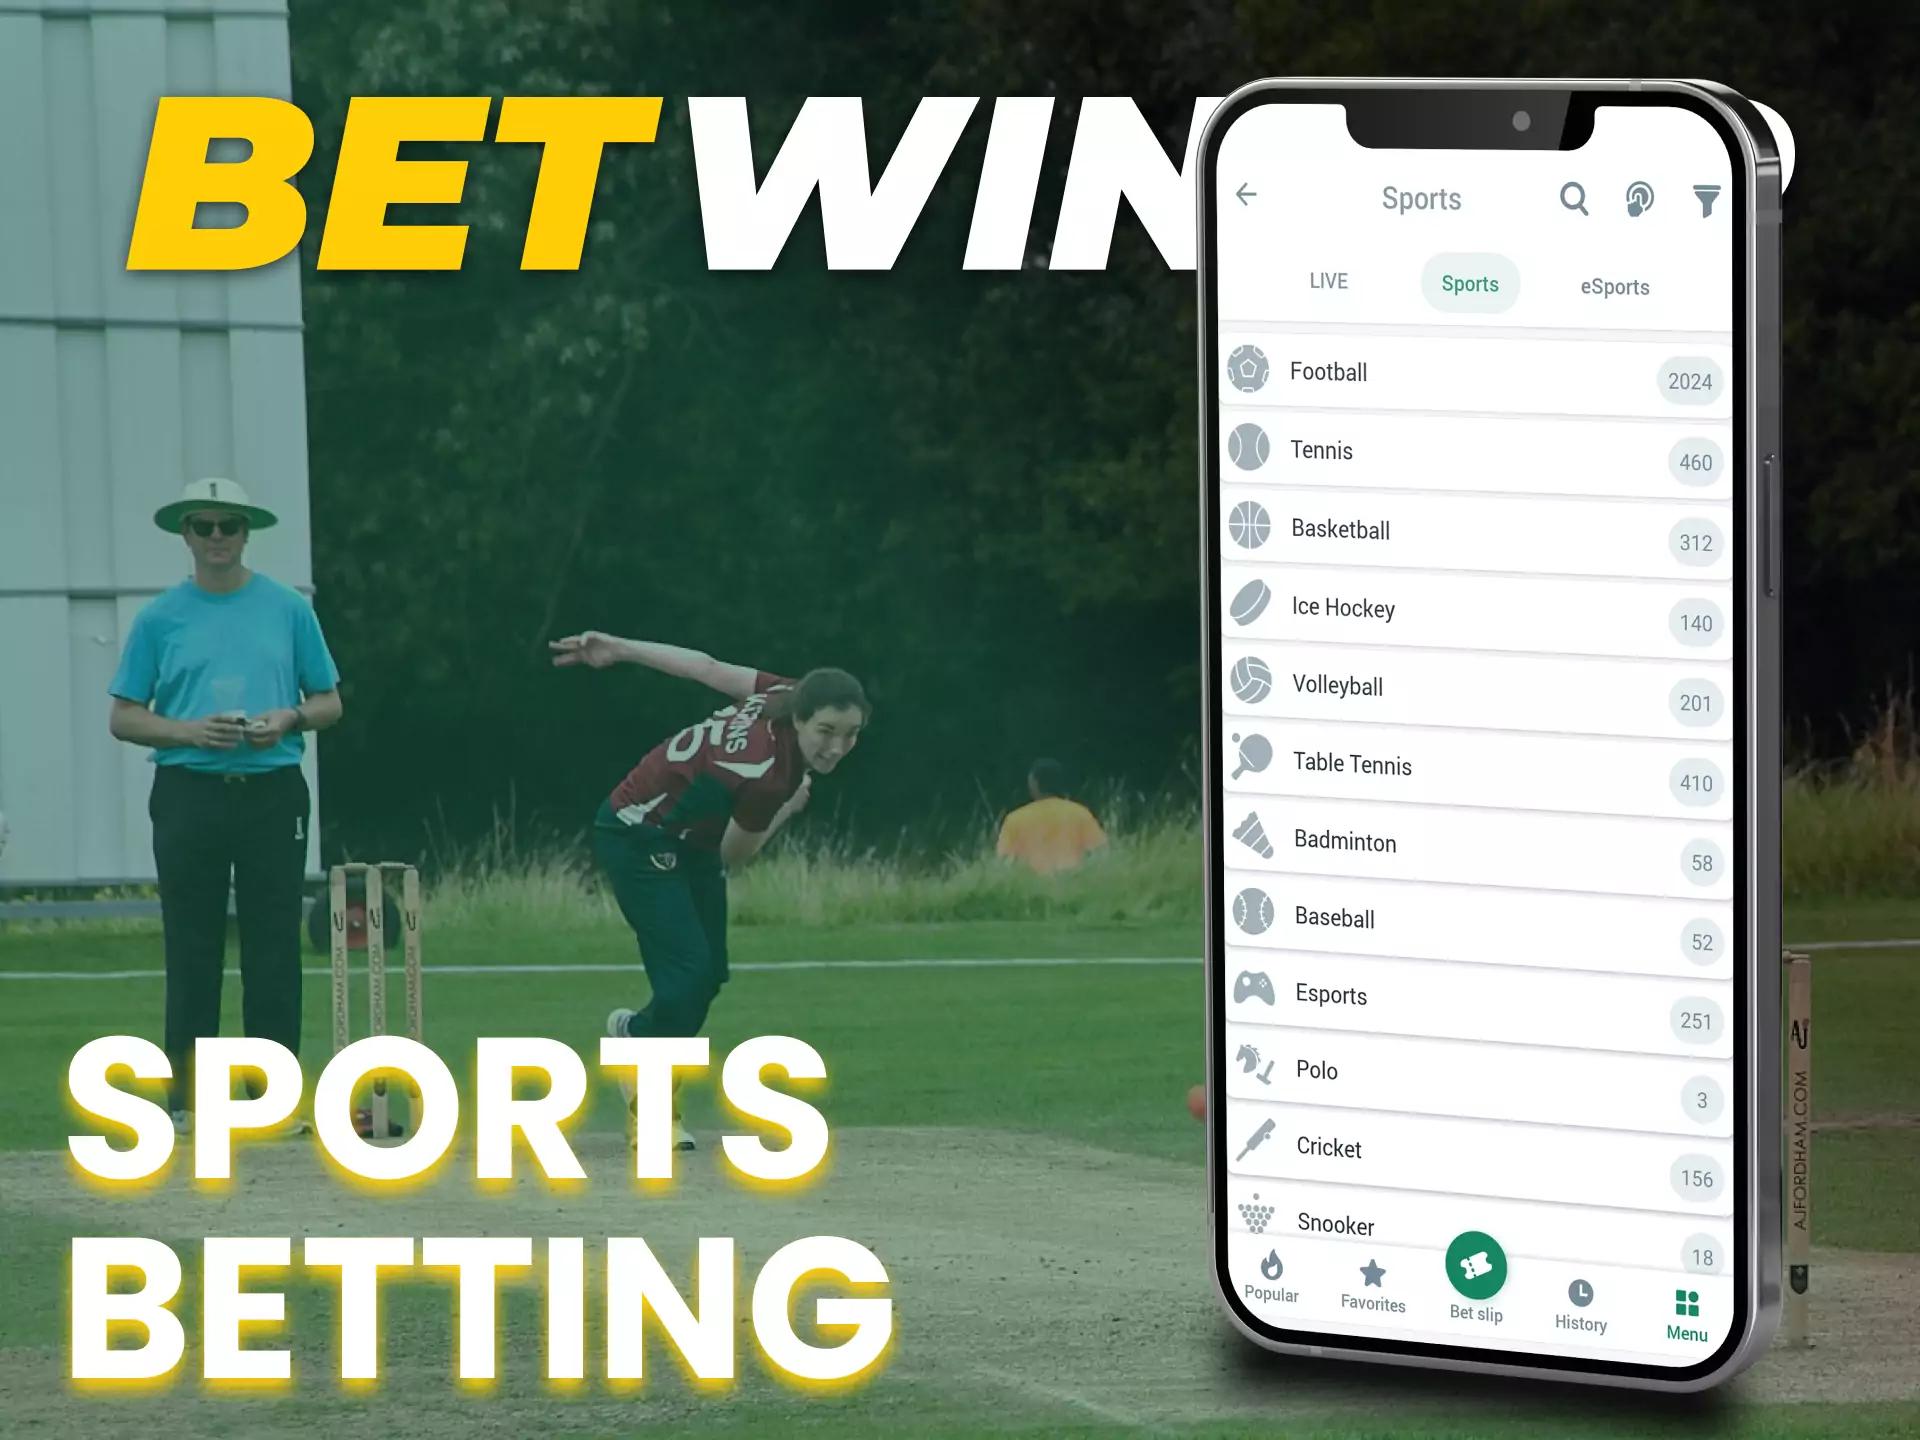 With the Betwinner app you can bet on all kinds of sports.